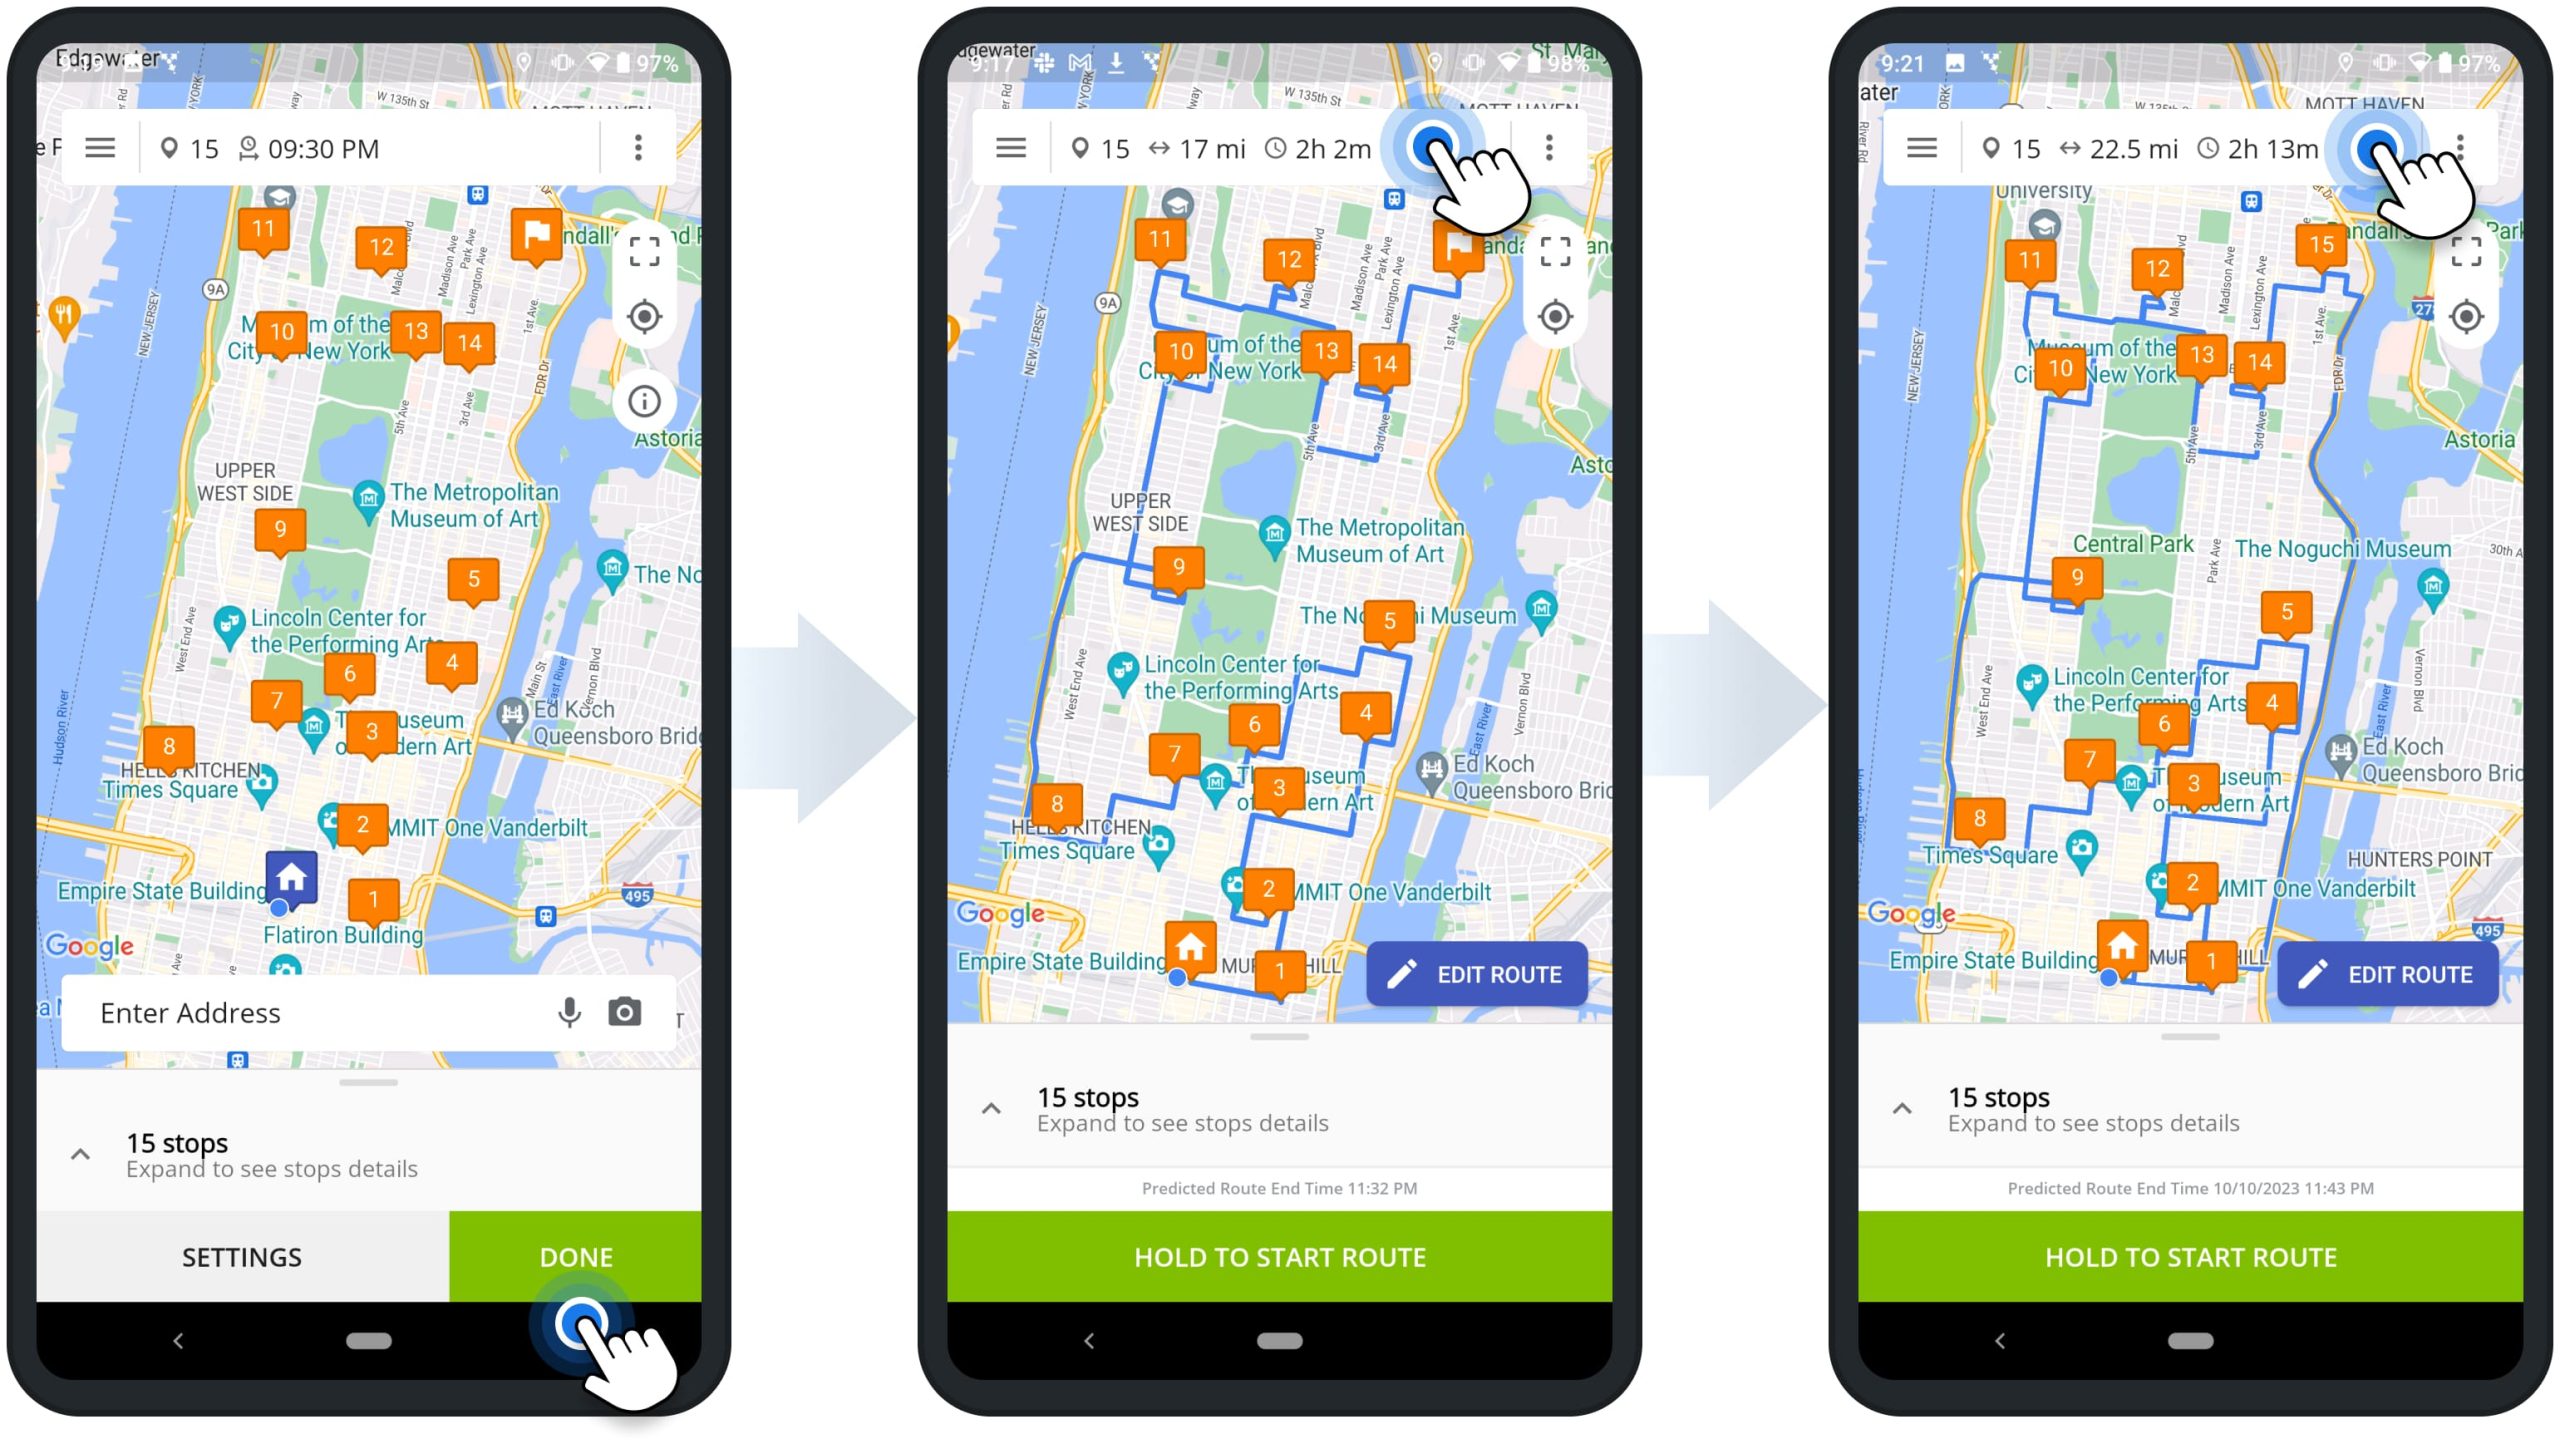 Update route settings, start time, trip type, and other route parameters on Route4Me's Android Multi-Address Route Planner app.